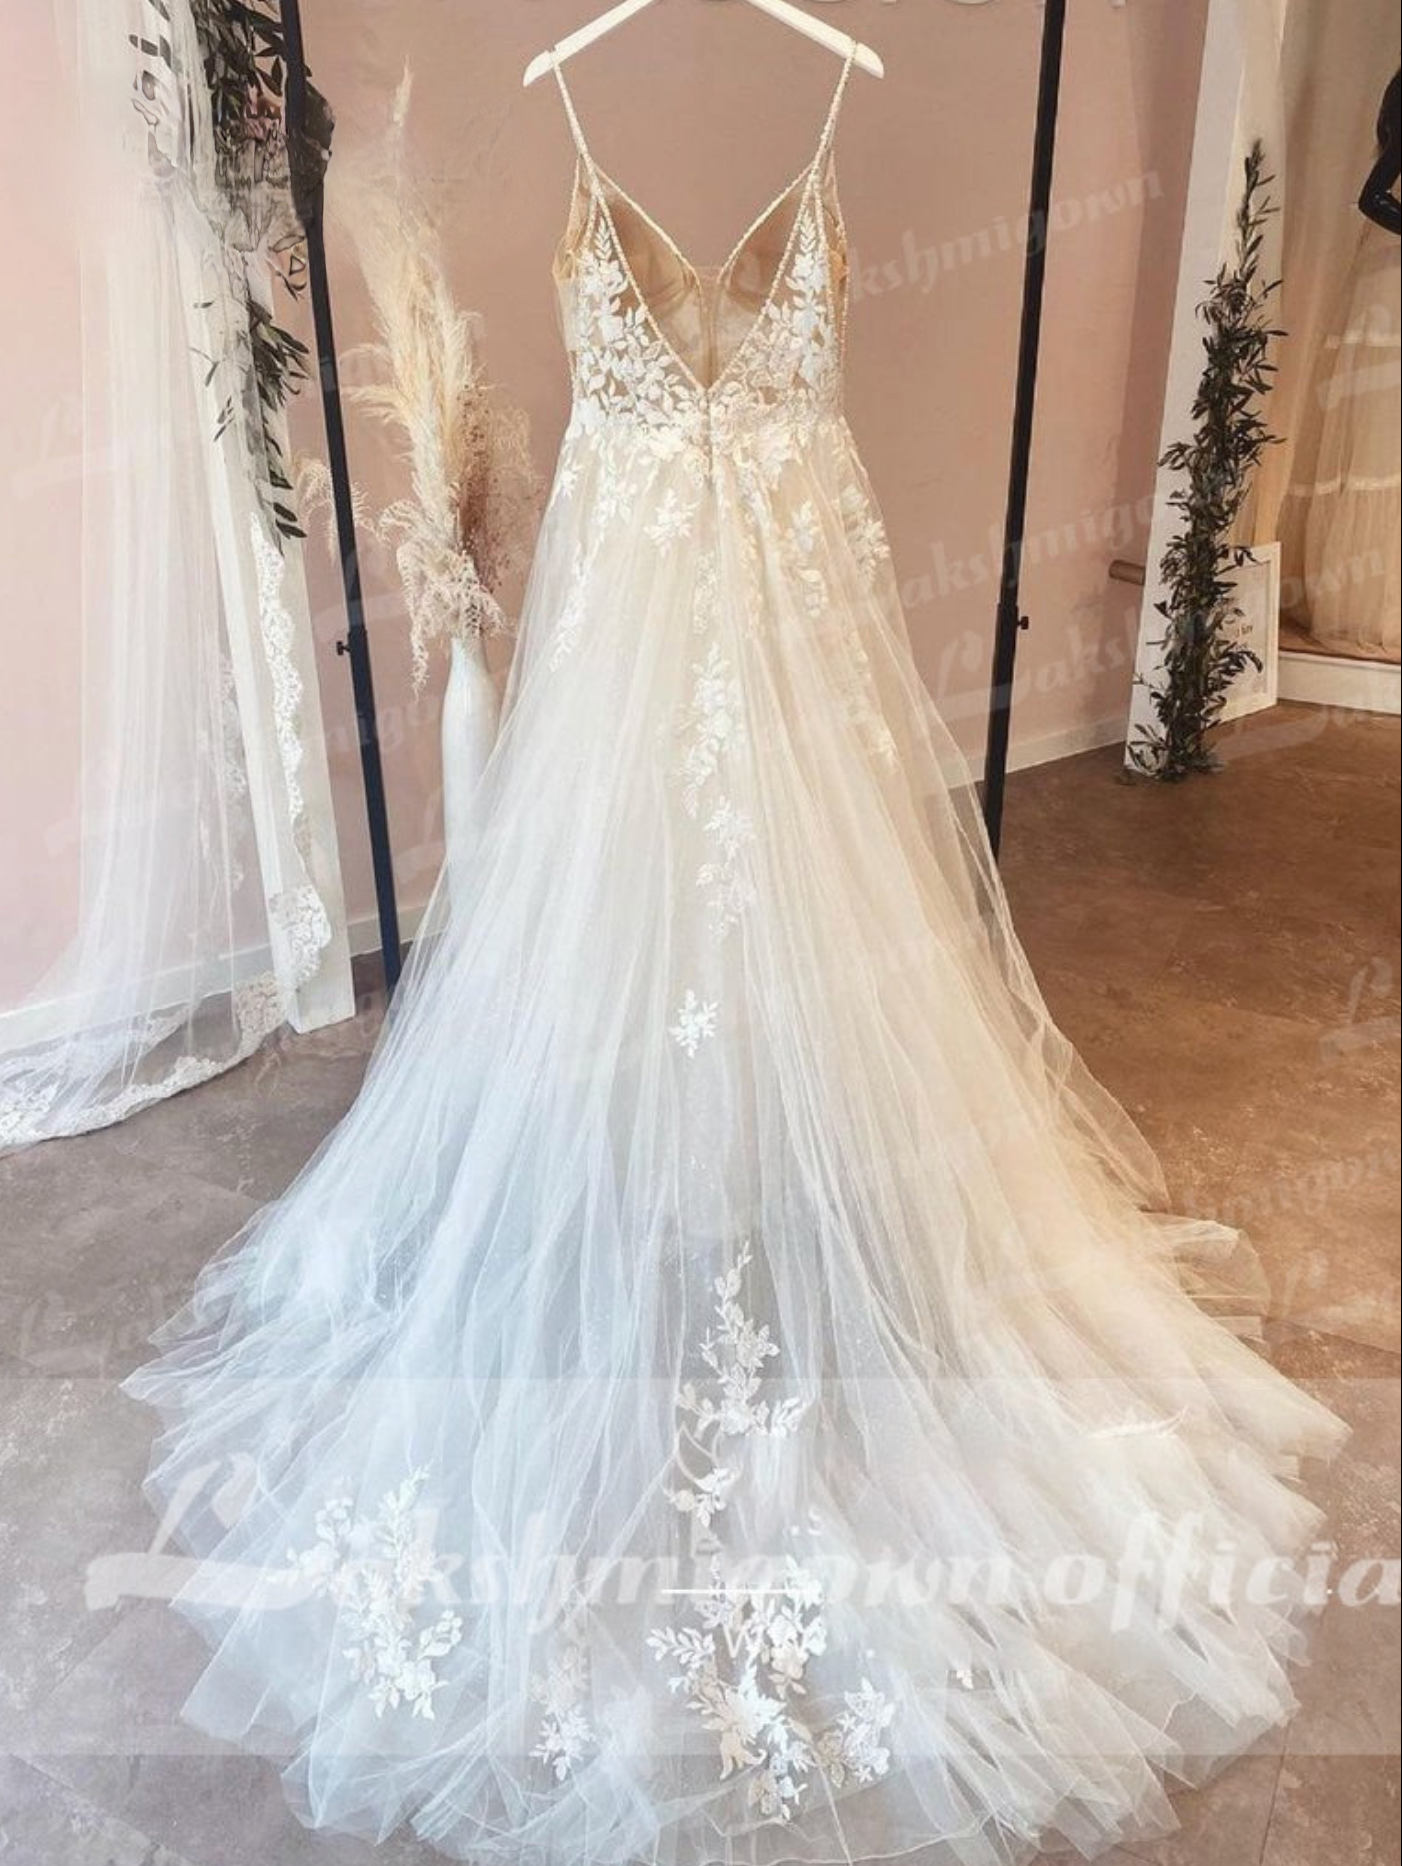 Spaghetti Strap Lace Wedding Dress With V Neckline Tulle Bridal Gown –  TulleLux Bridal Crowns & Accessories